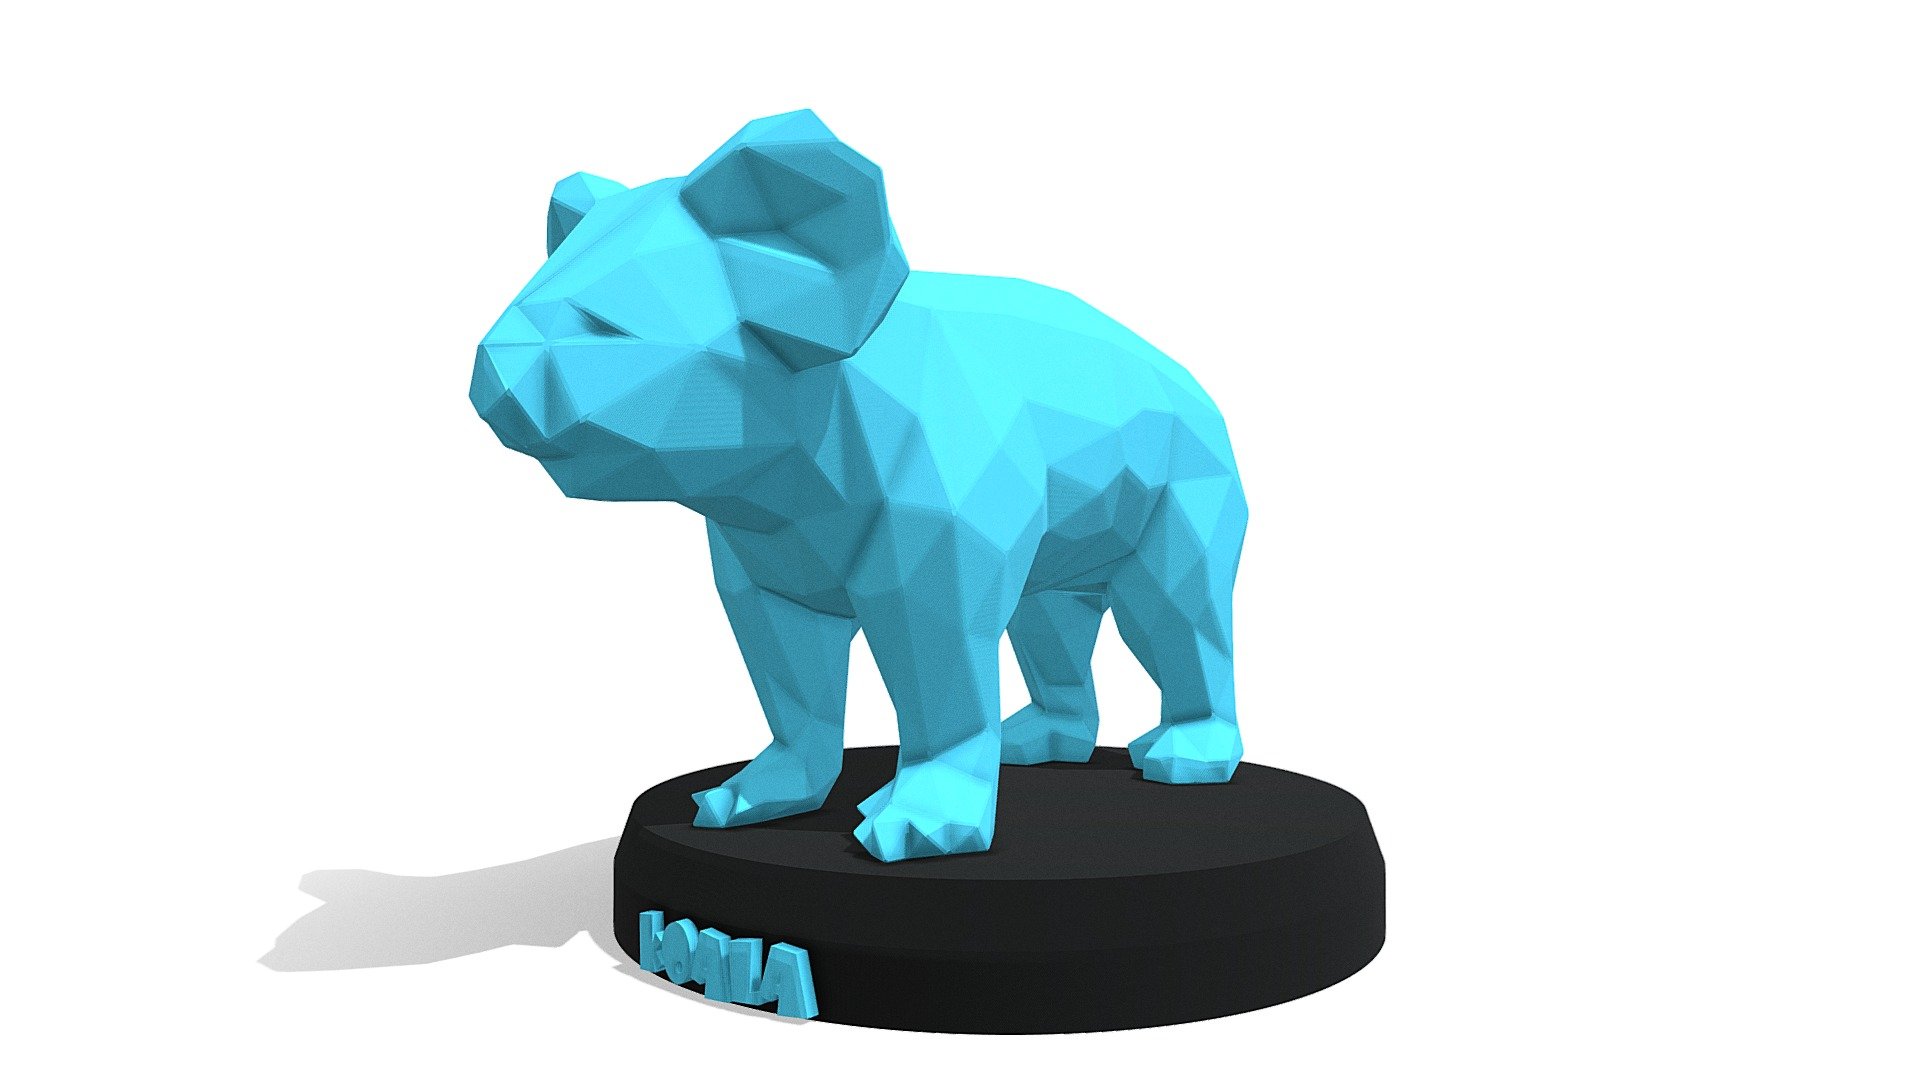 Polygonal 3D Model with Parametric modeling with gold material, make it recommend for :




Basic modeling 

Rigging 

sculpting 

Become Statue

Decorate

3D Print File

Toy

Have fun  :) - Poly Koala - Buy Royalty Free 3D model by Puppy3D 3d model